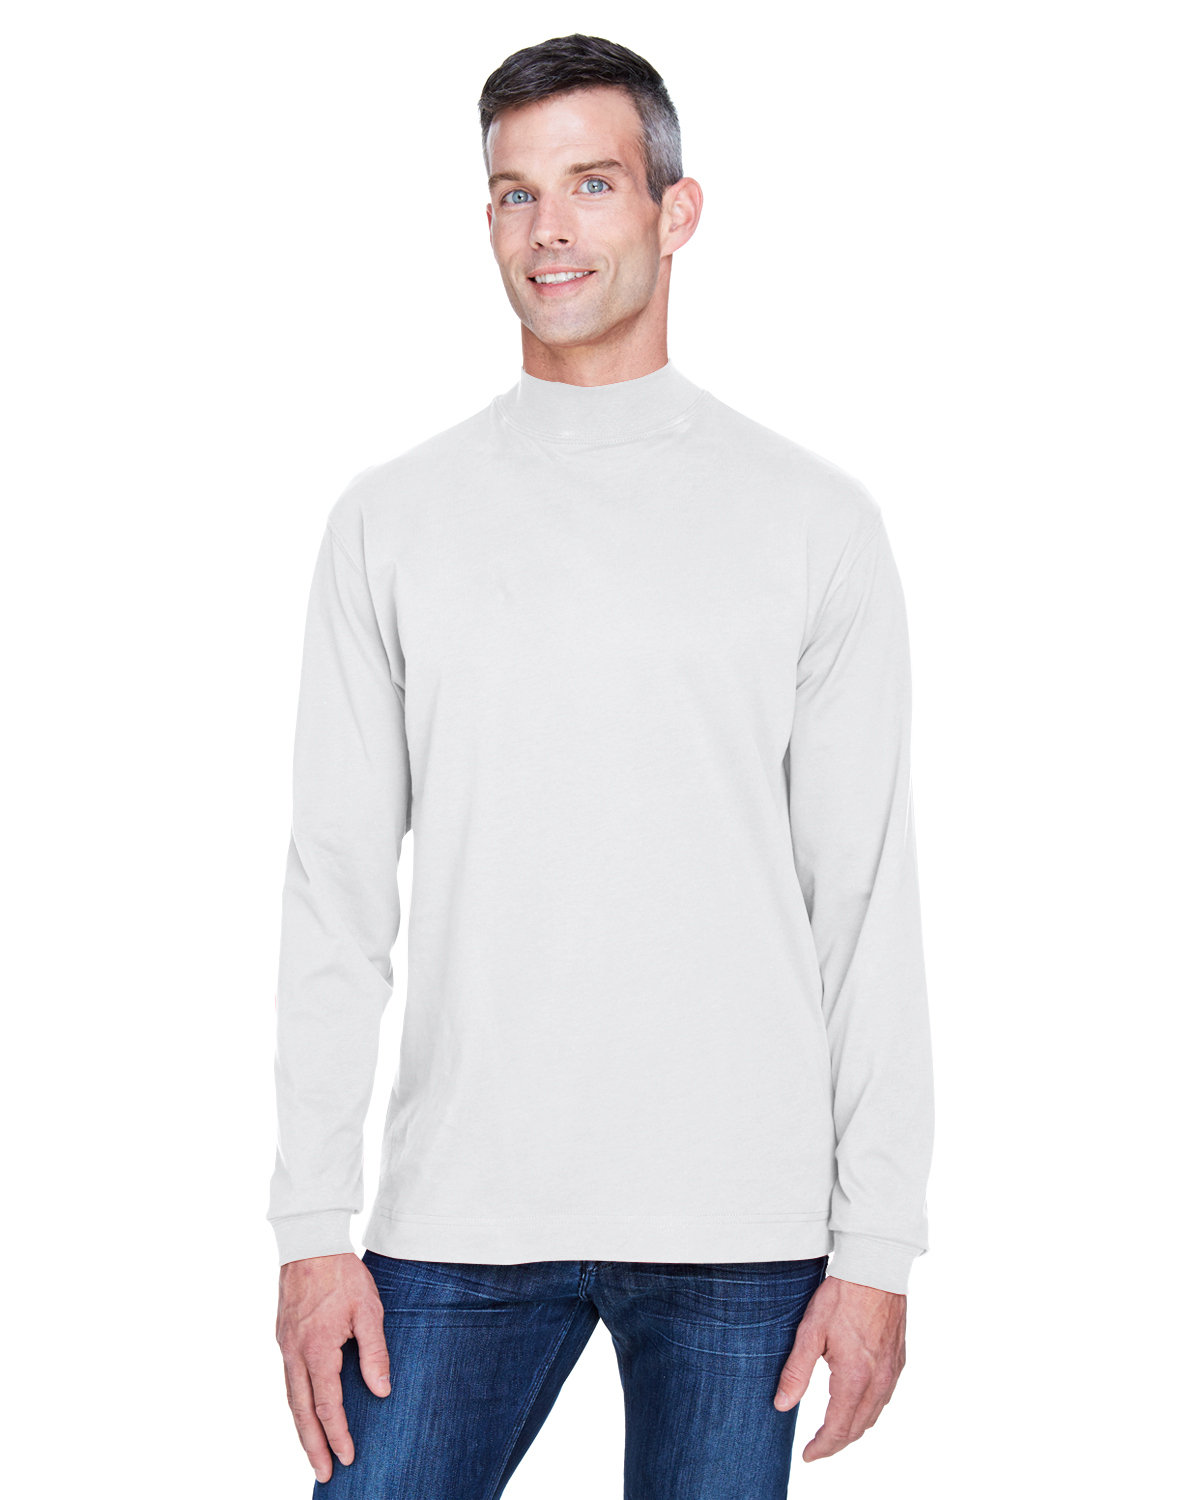 Front view of Adult Sueded Cotton Jersey Mock Turtleneck